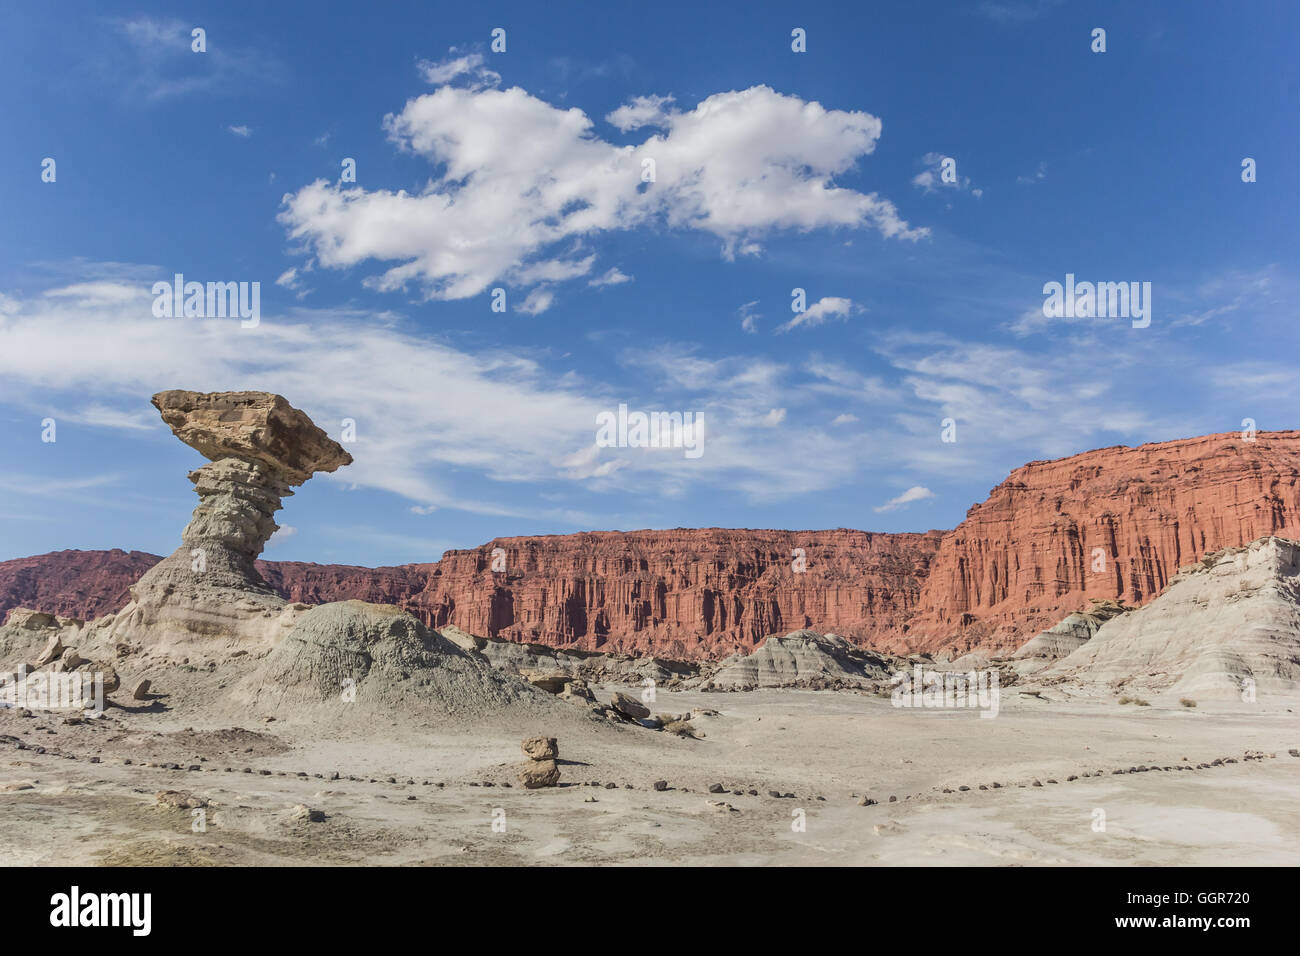 Rock formations at Ischigualasto provincial park, Argentina. Stock Photo